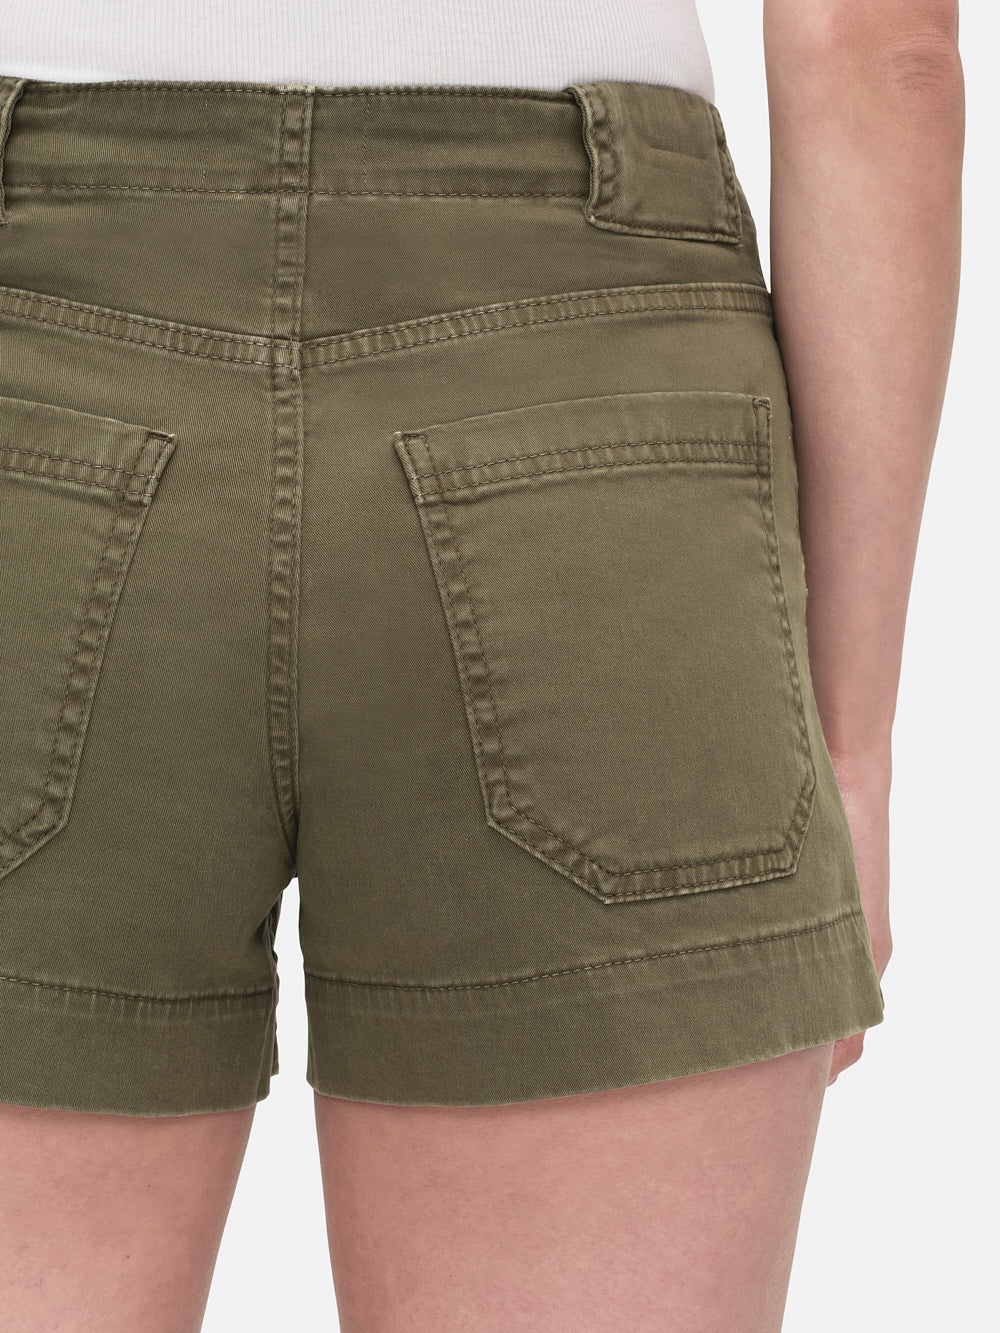 Clean Utility Short in Washed Winter Moss - 4